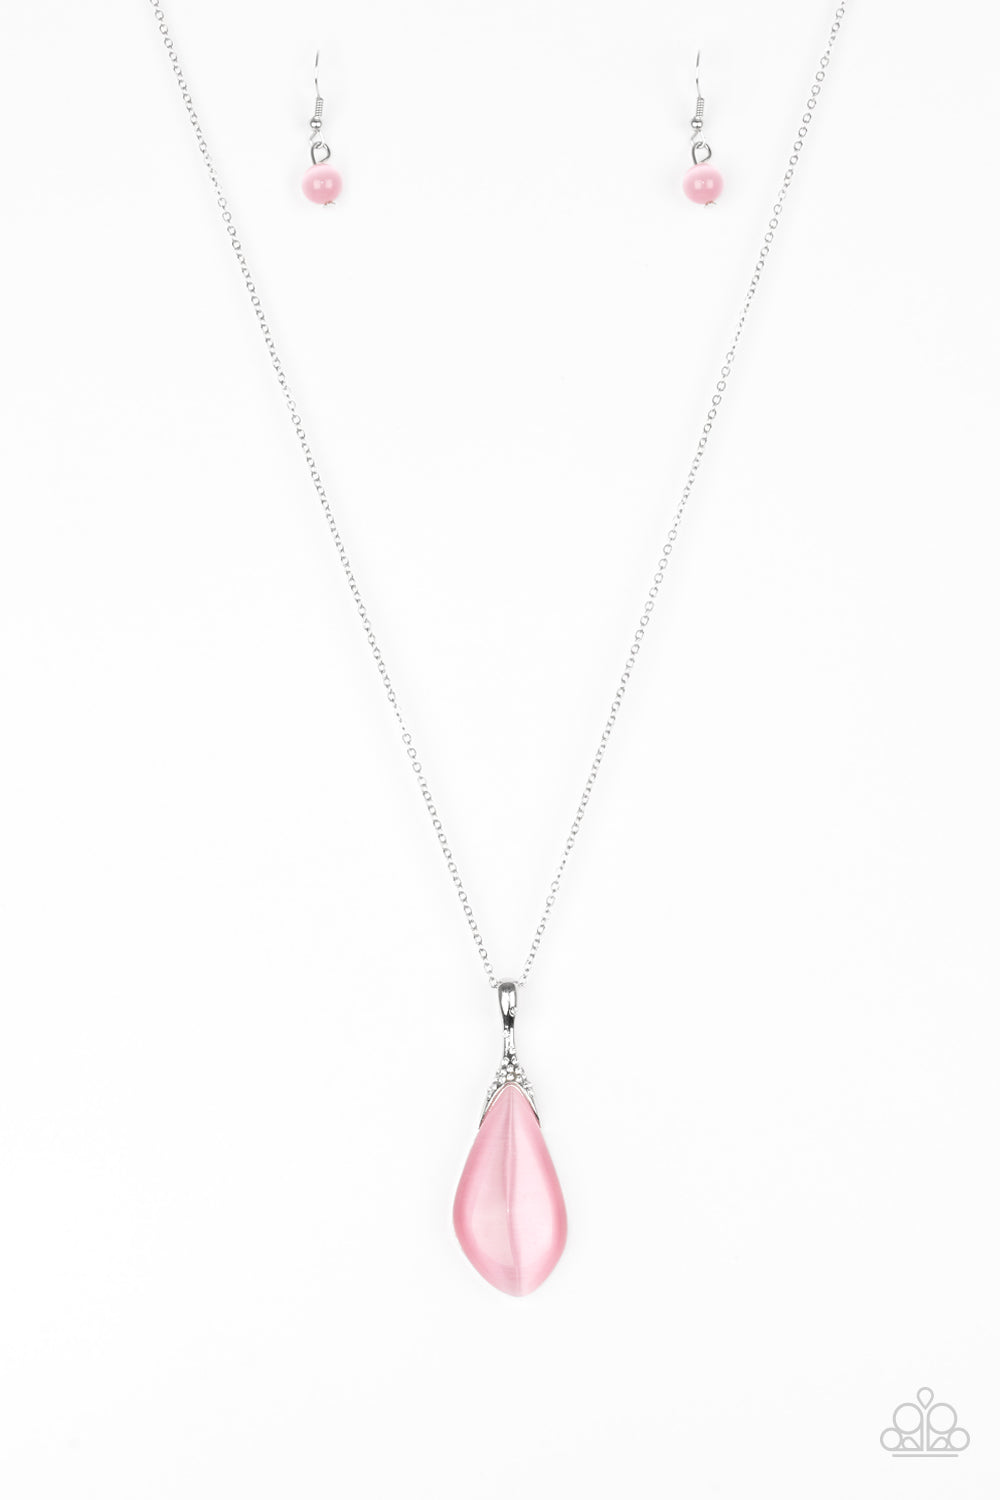 FRIENDS IN GLOW PLACES - PINK NECKLACE